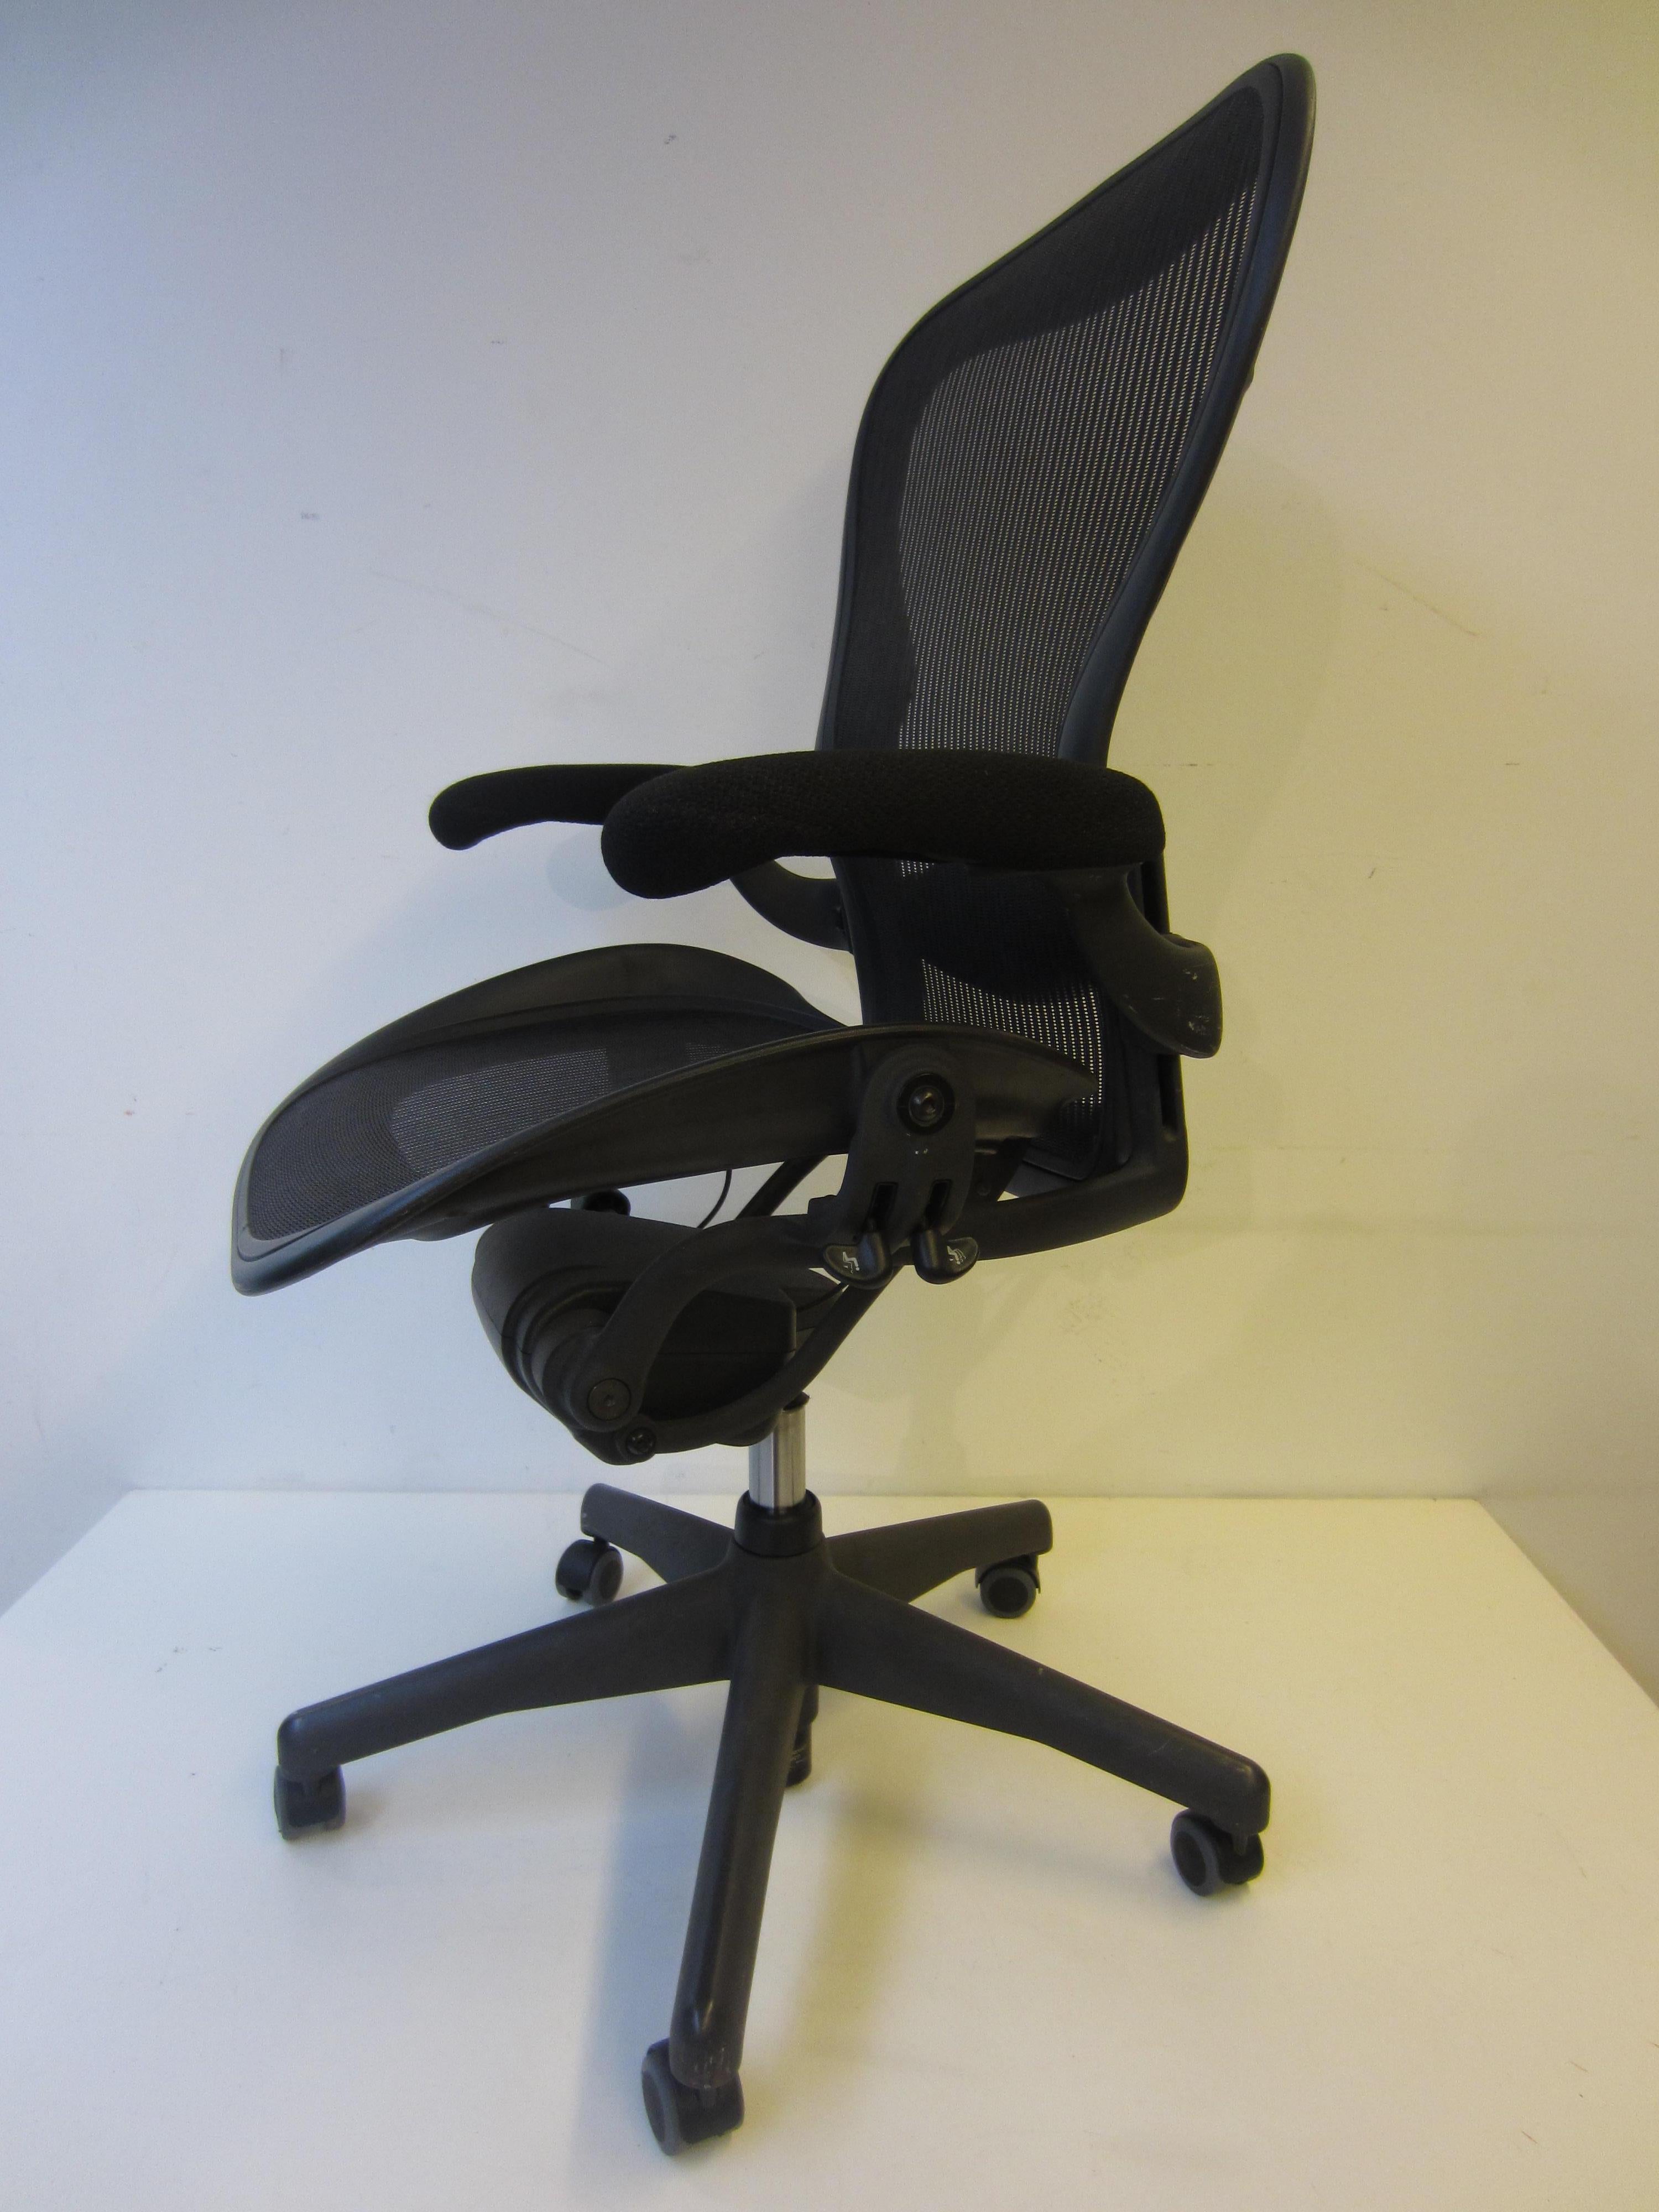 Durability, ergonomics and a beautiful design are central features of this Aeron desk chair. Designed by Bill Stumpf & Don Chadwick.
The seat and back of the Aeron are made of 'Pellicle'. A highly resistant synthetic material (Hytrel) that was